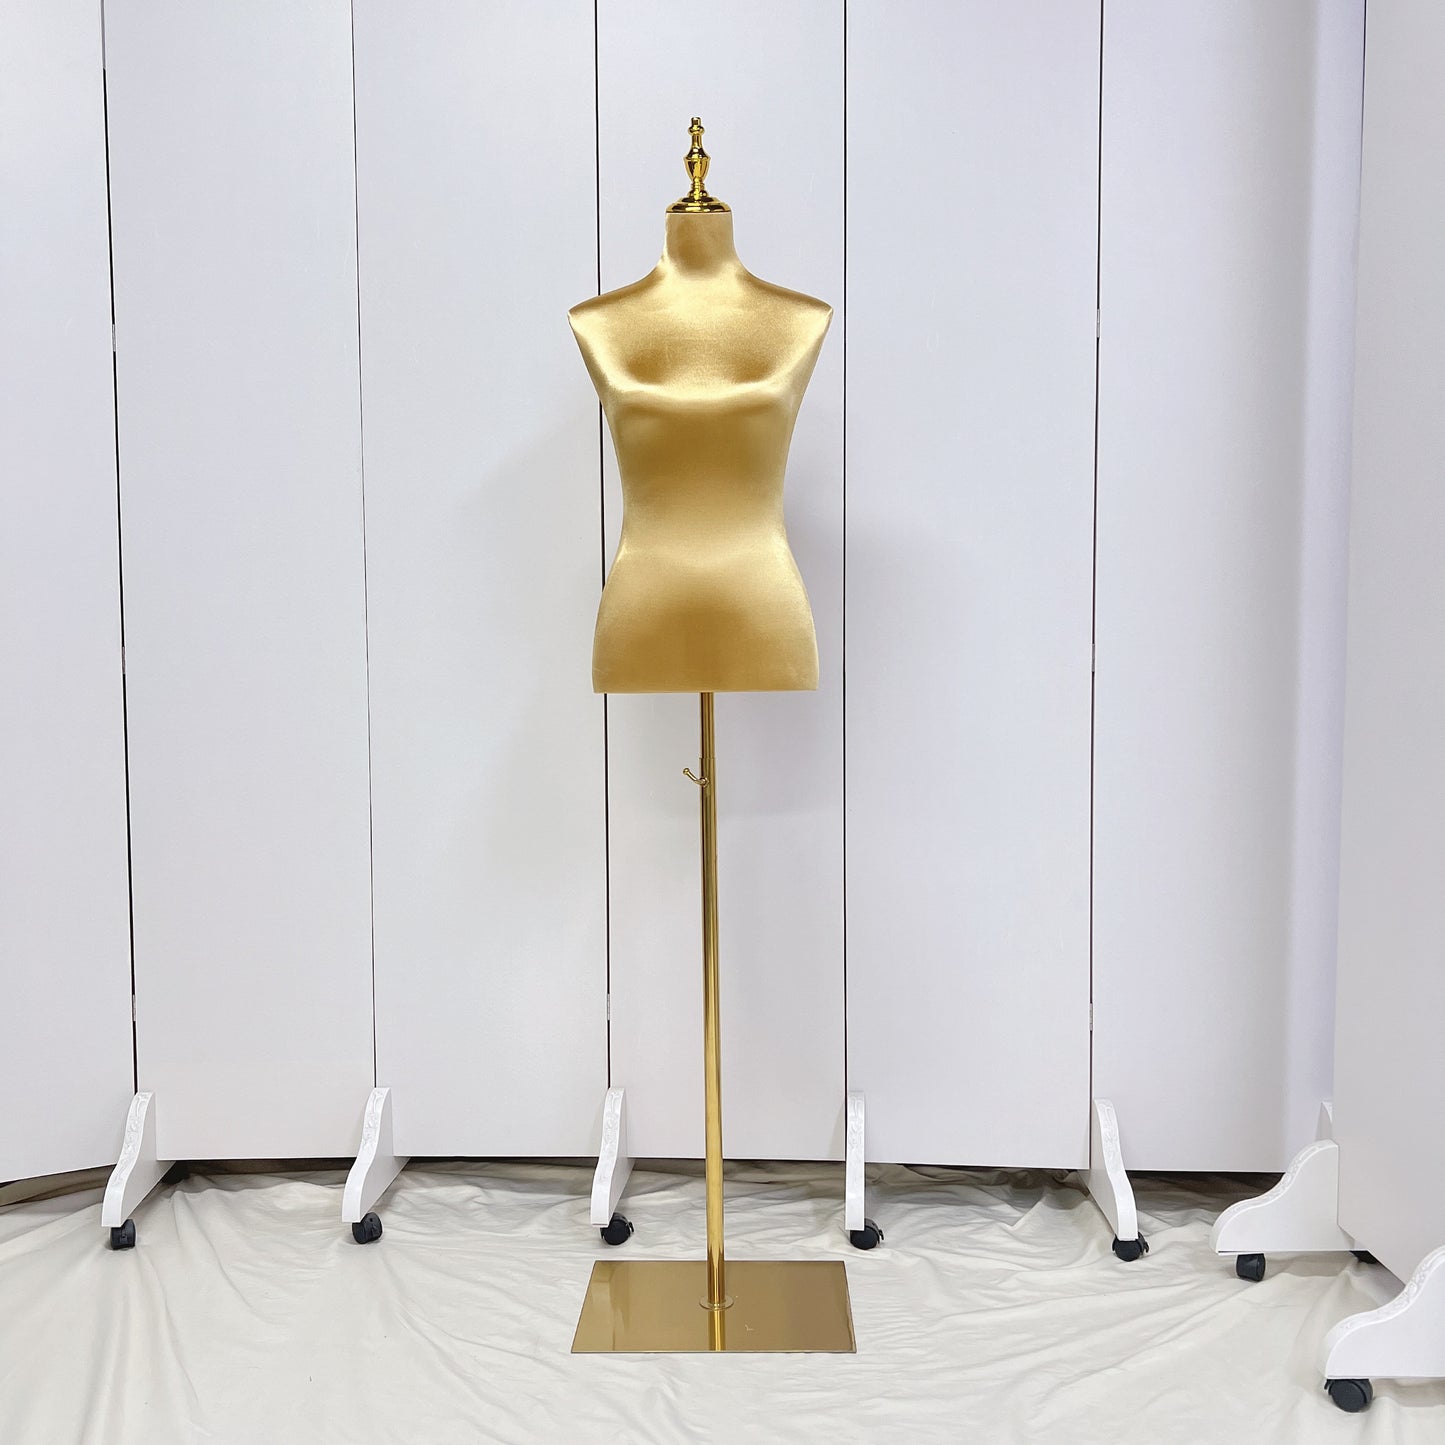 Clearance Satin Female Half Body Mannequin, Adjustable Women Silk Dress form Torso, Clothing Model Props,Lady Display Form with Golden Base DE-LIANG